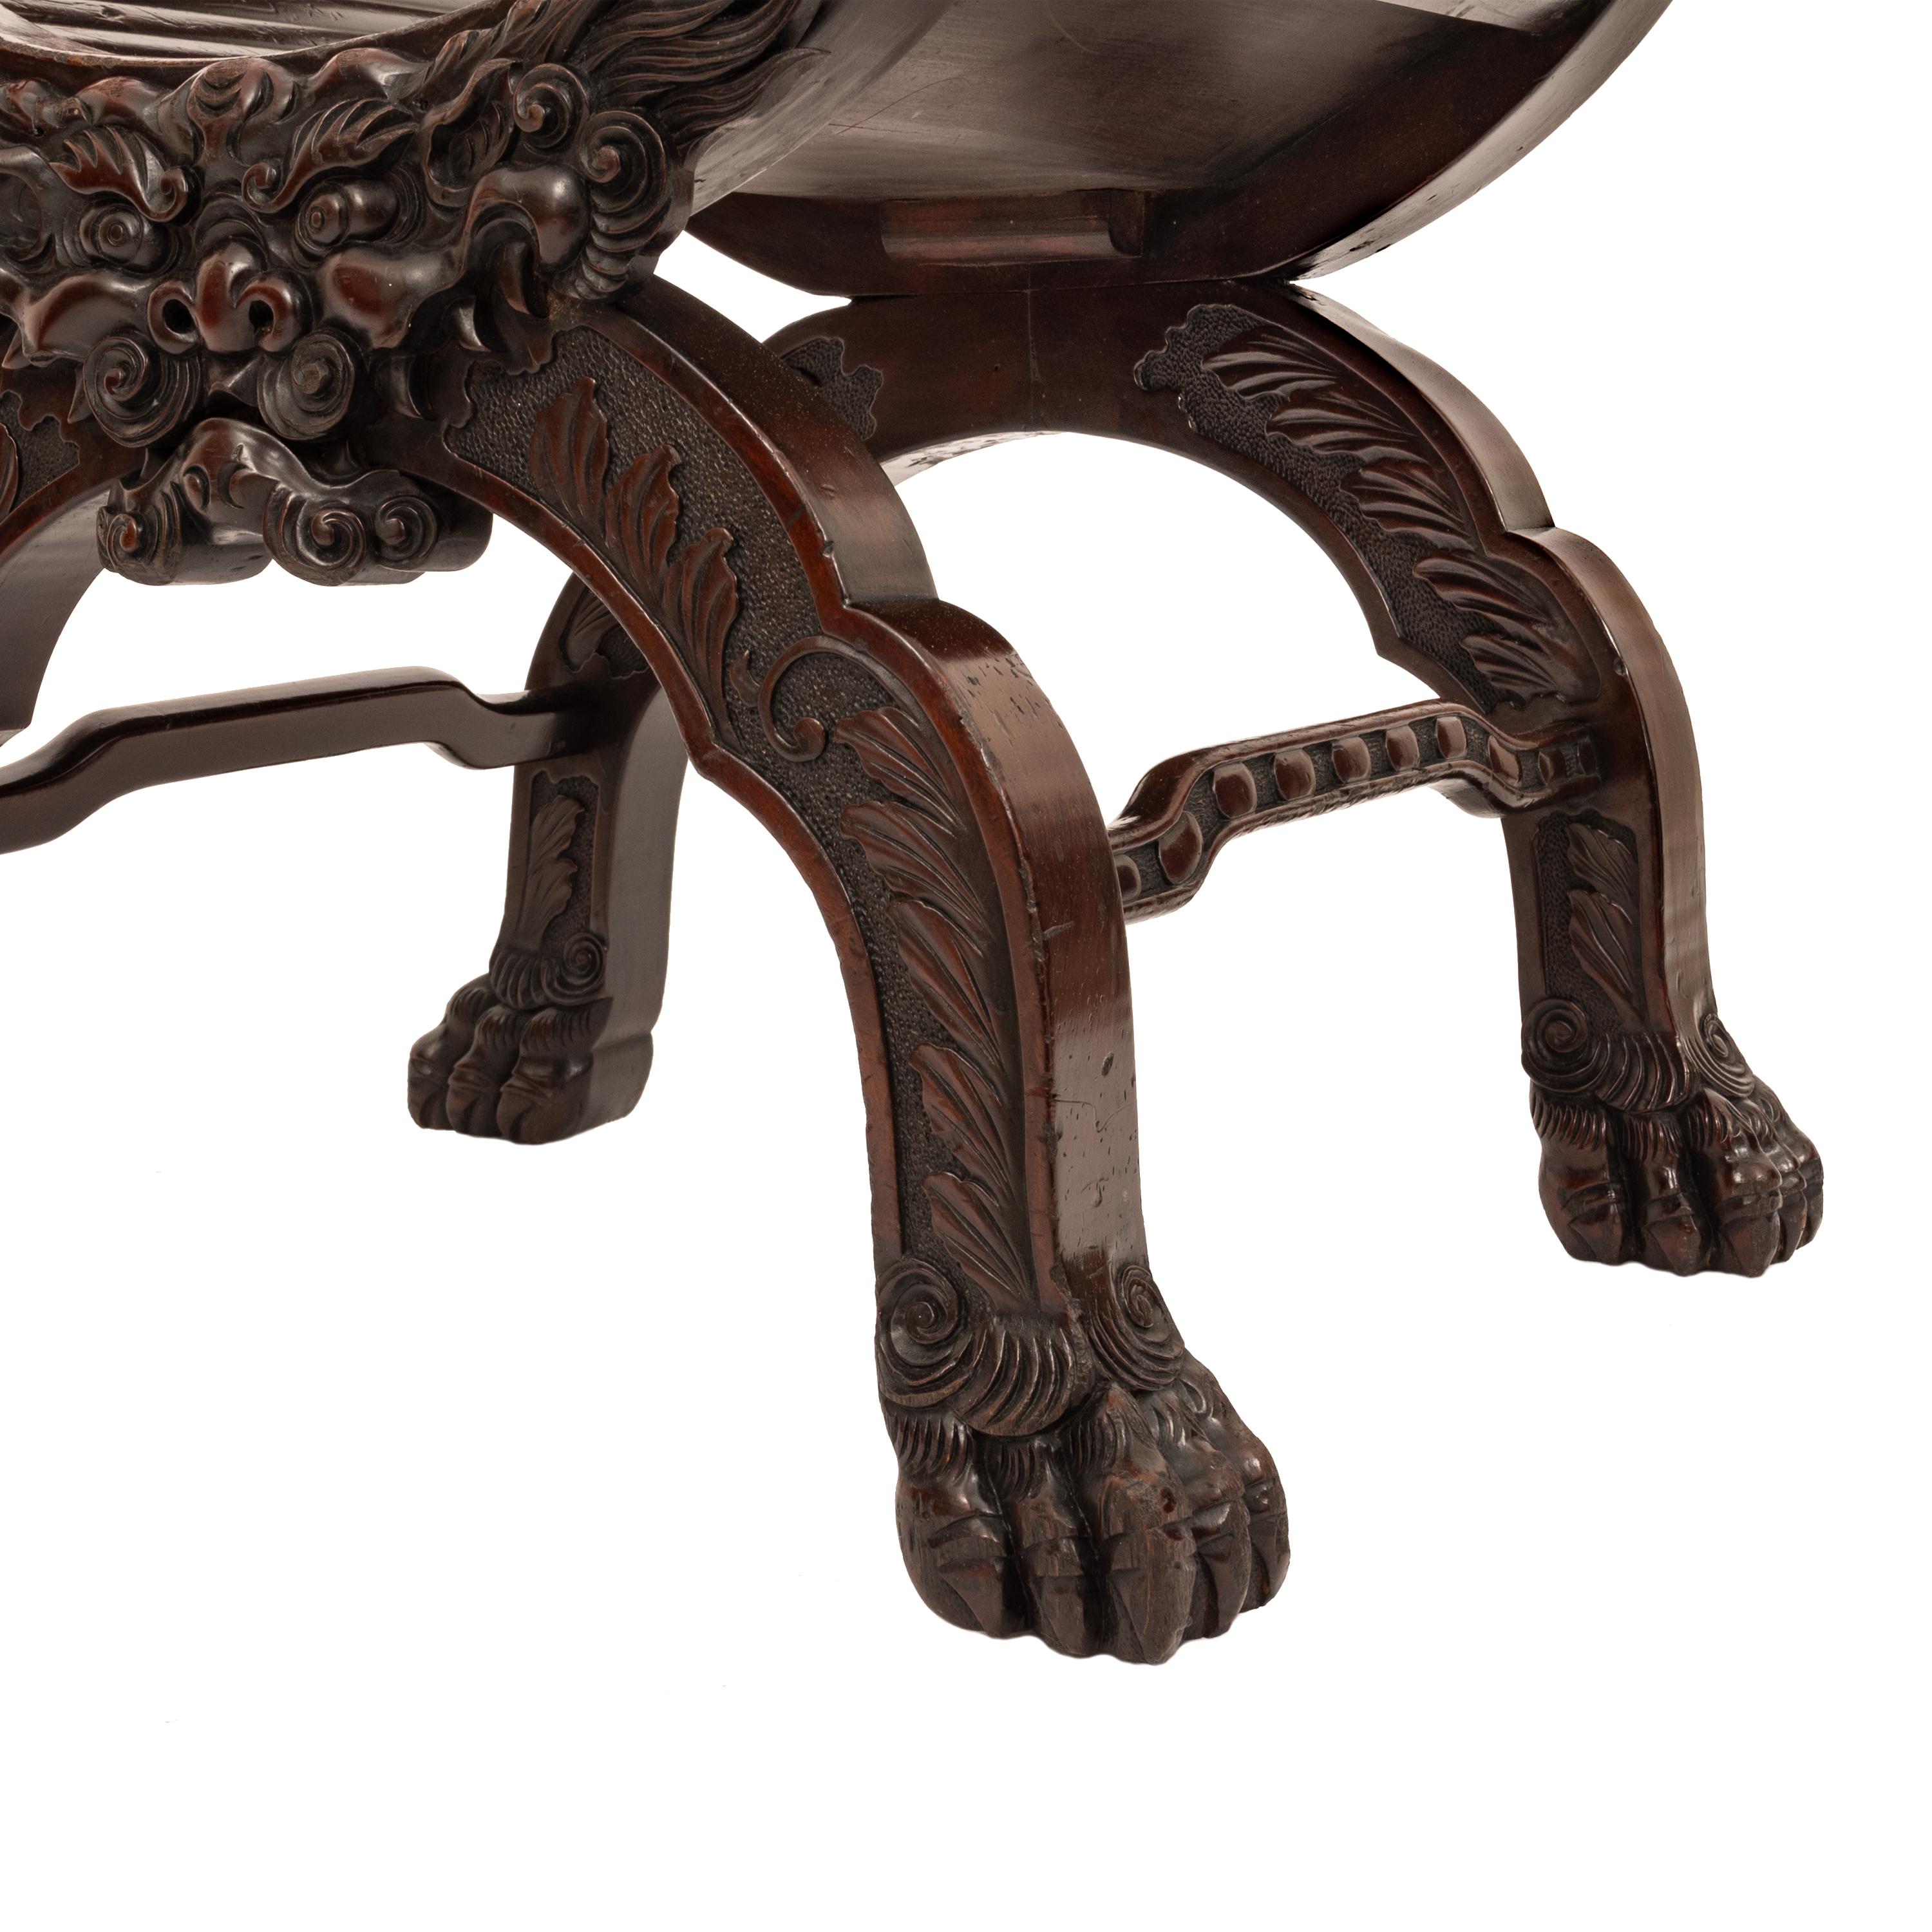 Mahogany Antique American Robert Mitchell Carved Chinoiserie Savonarola Dragon Chair 1900 For Sale